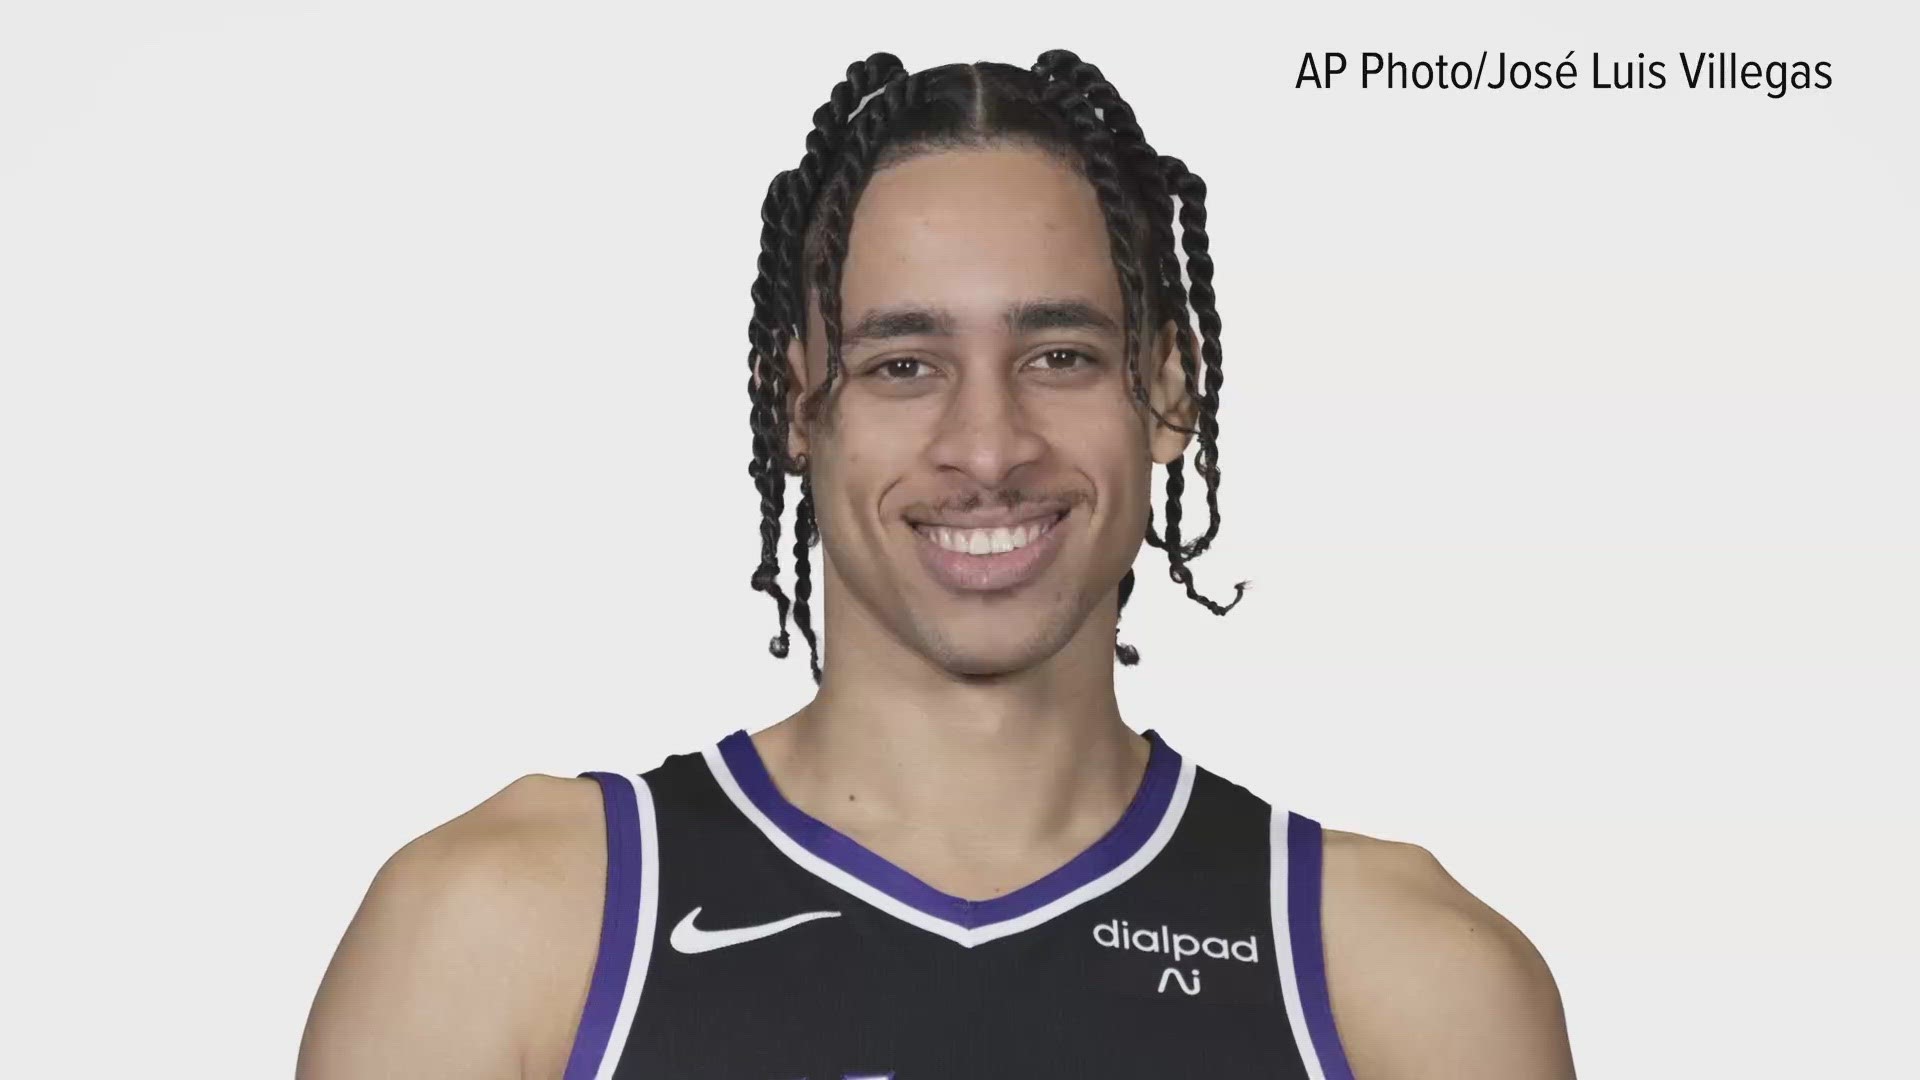 The NBA G League affiliate of the Sacramento Kings, announced they "released" Chance Comanche but did not give any more information.